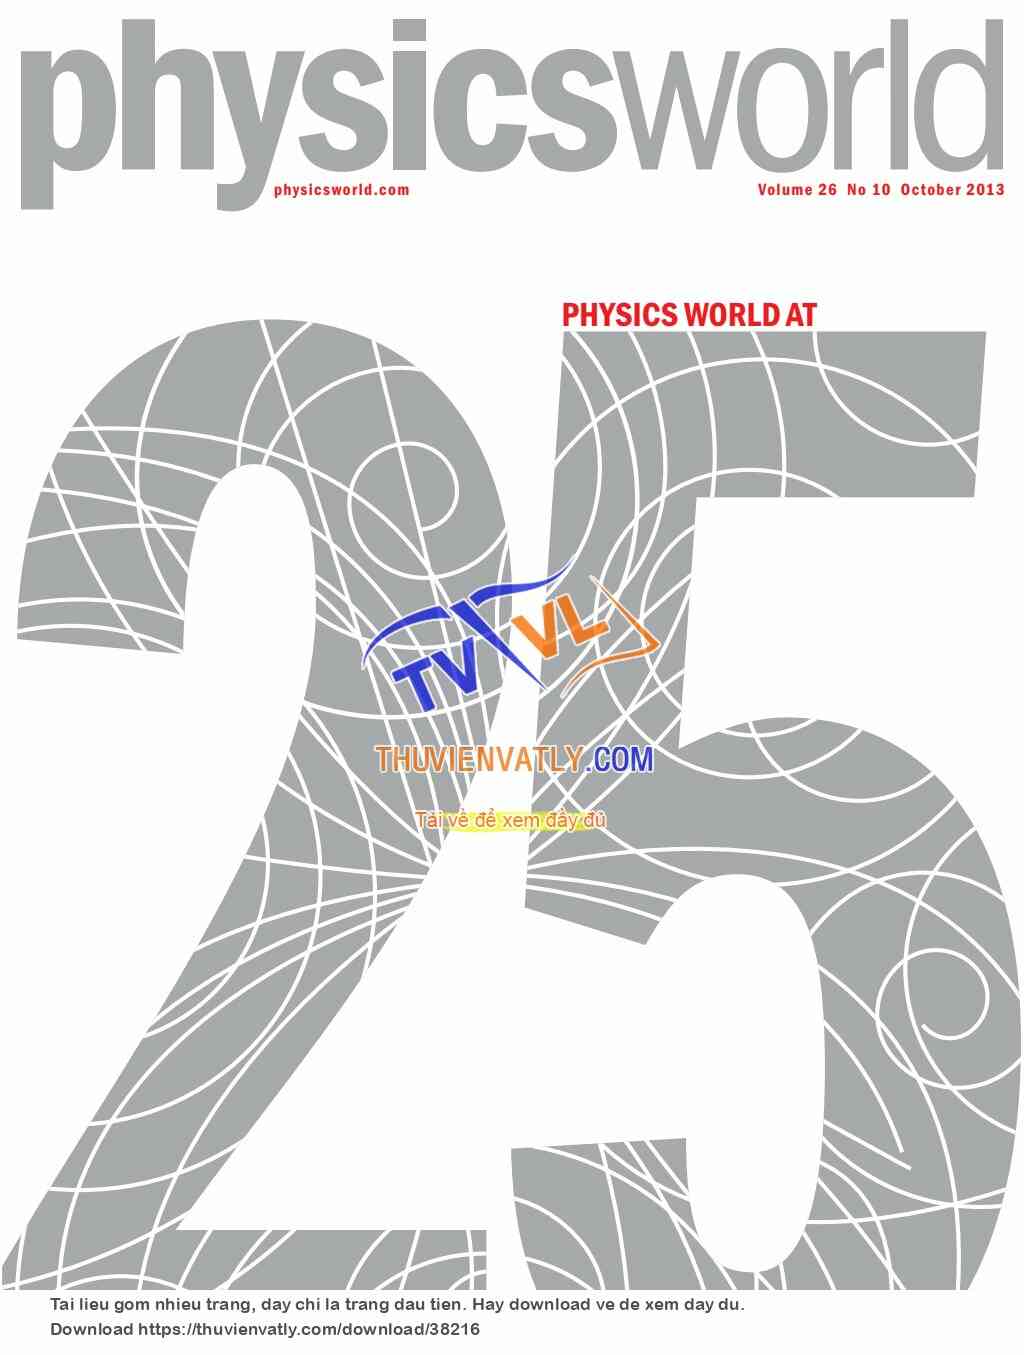 Physics World at 25 October 2013 special issue